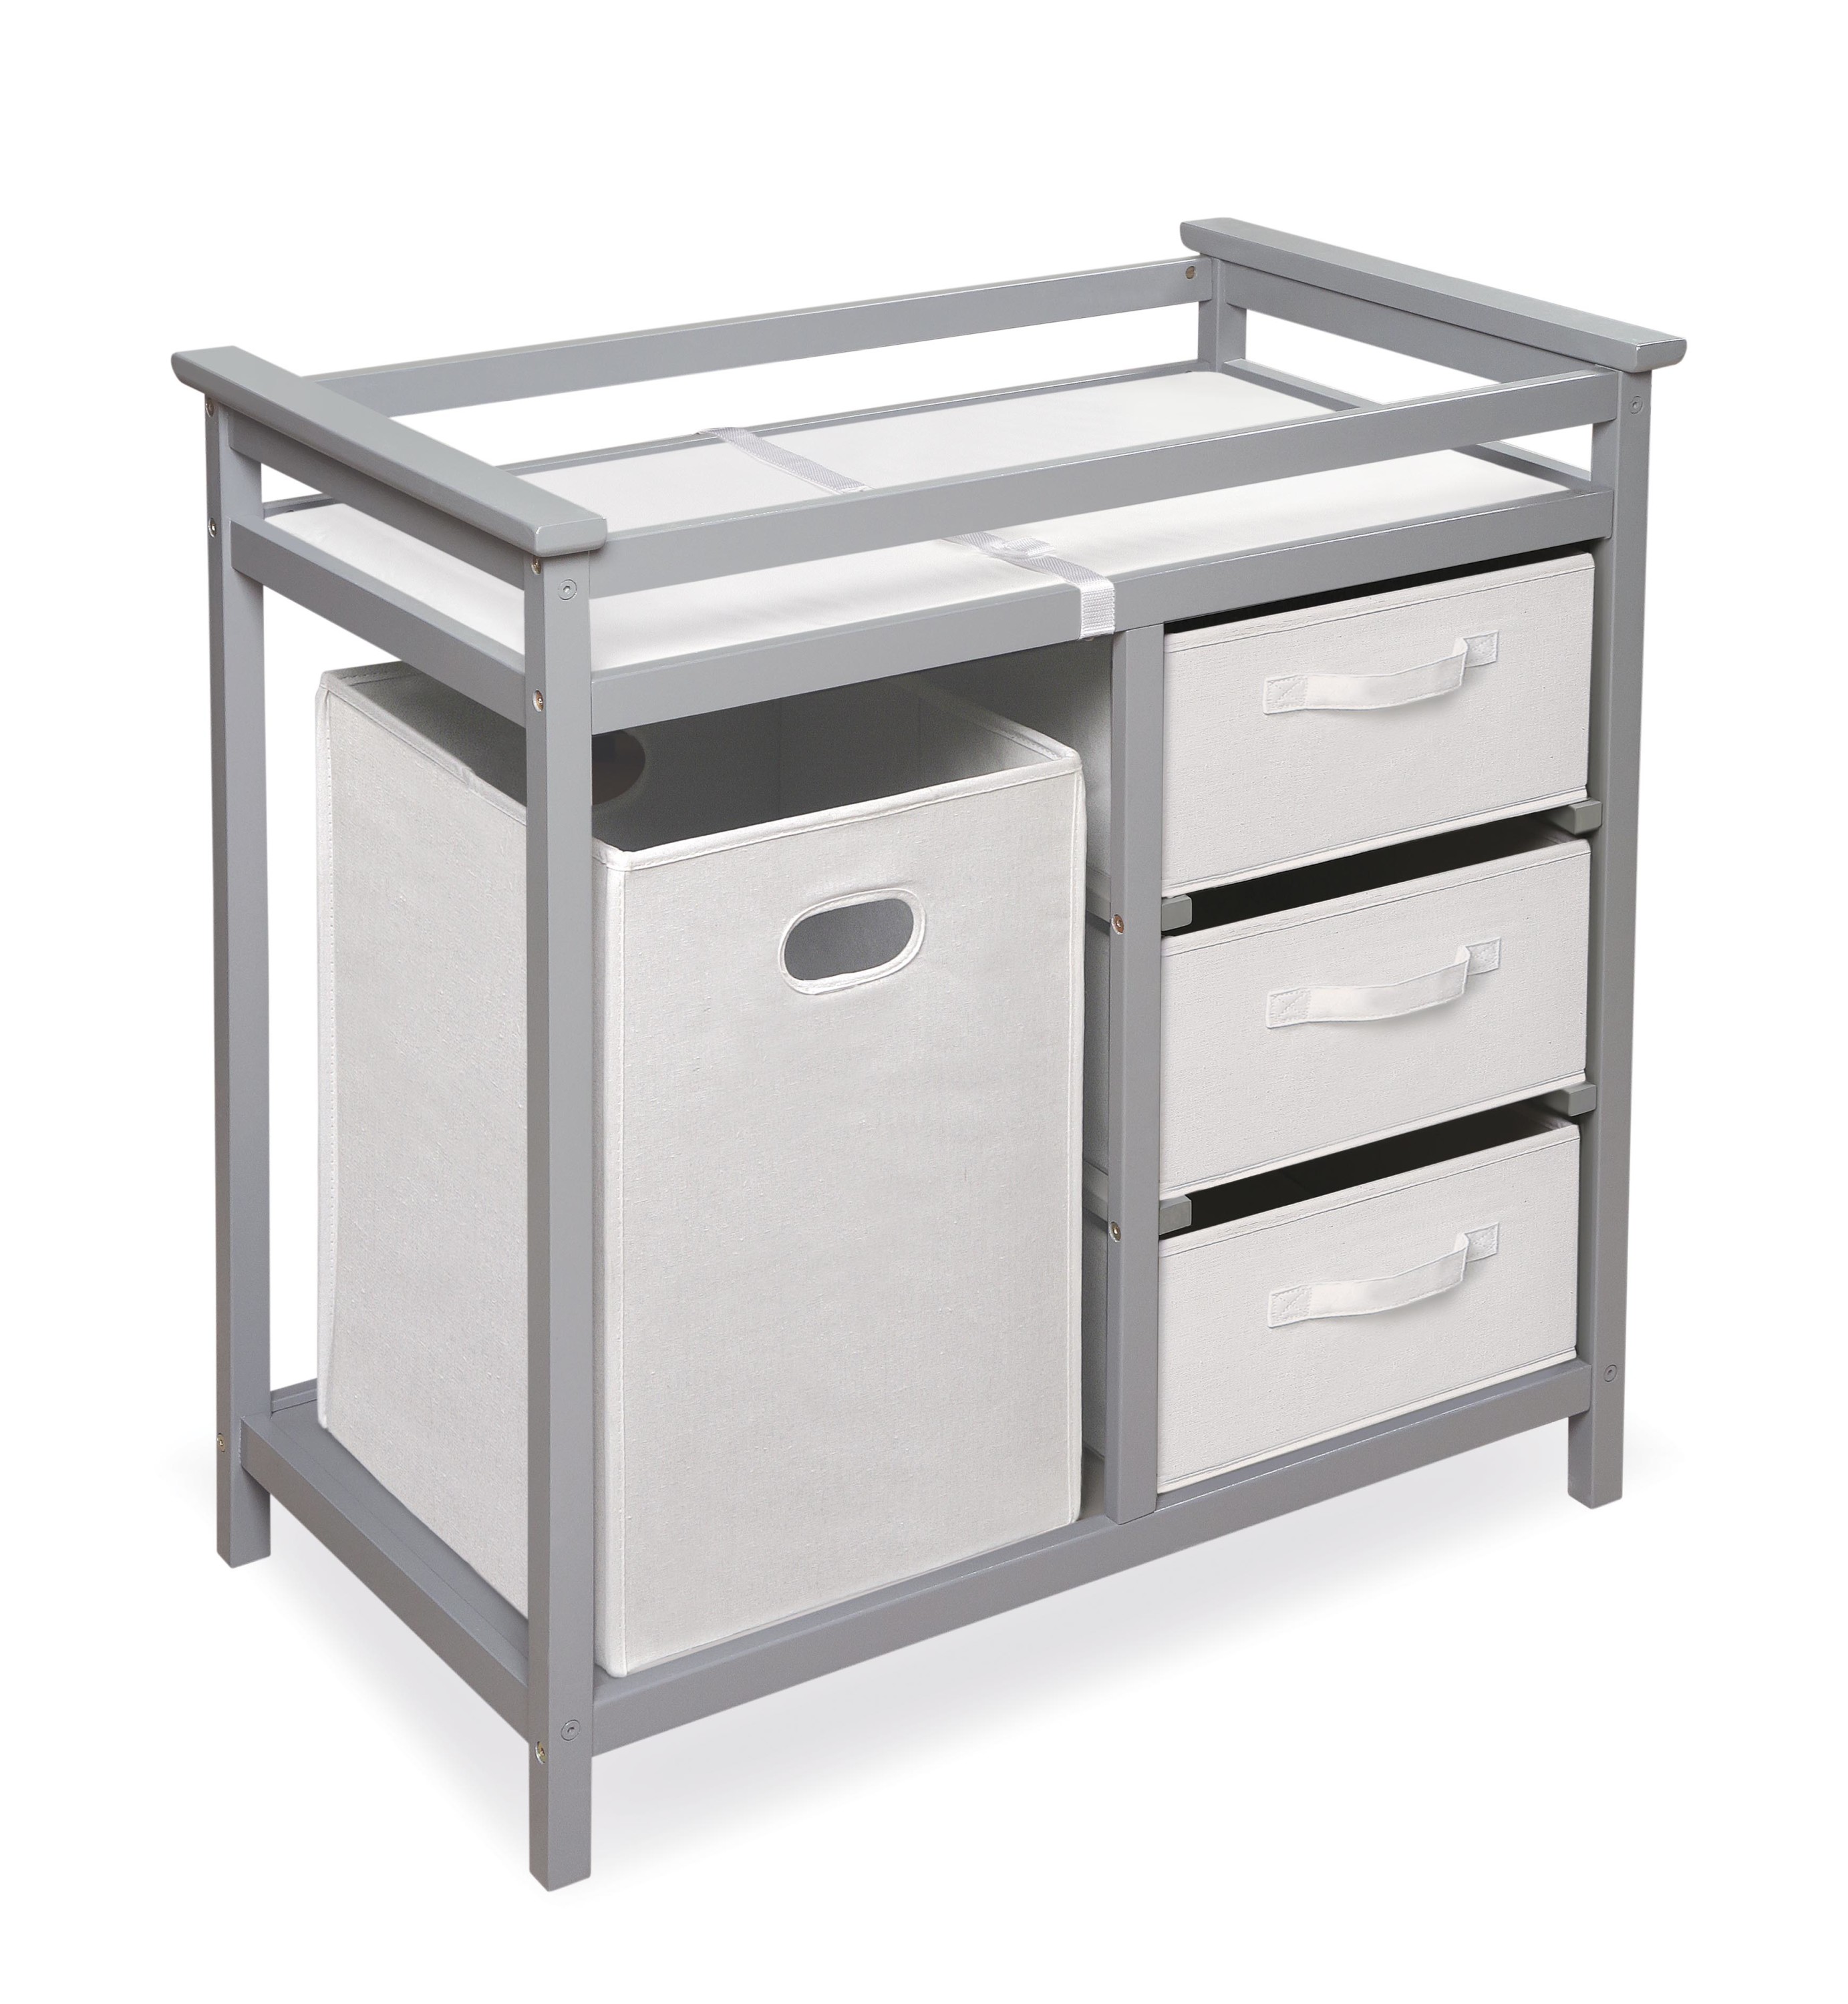 Badger Basket Modern Baby Changing Table with Hamper and 3 Baskets - Gray - image 1 of 10